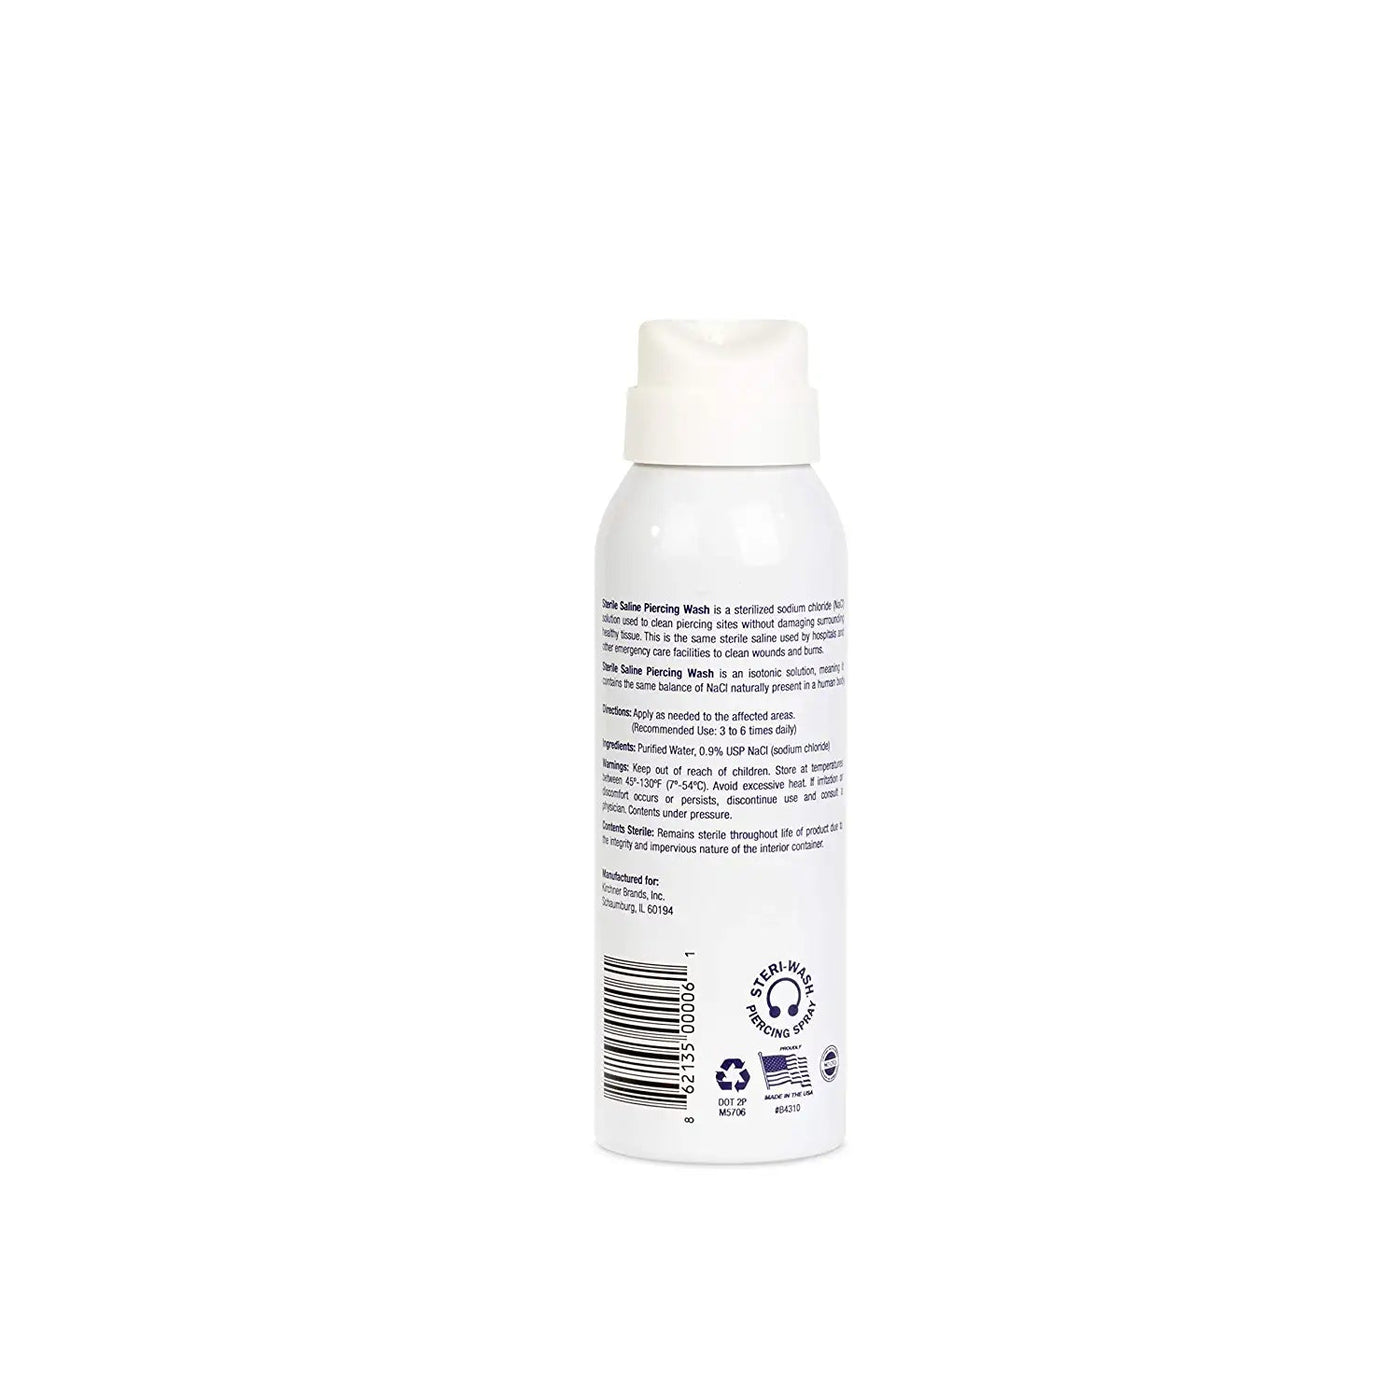 Steri Wash Aftercare Piercing Spray - Piercing Aftercare - FYT Tattoo Supplies Canada